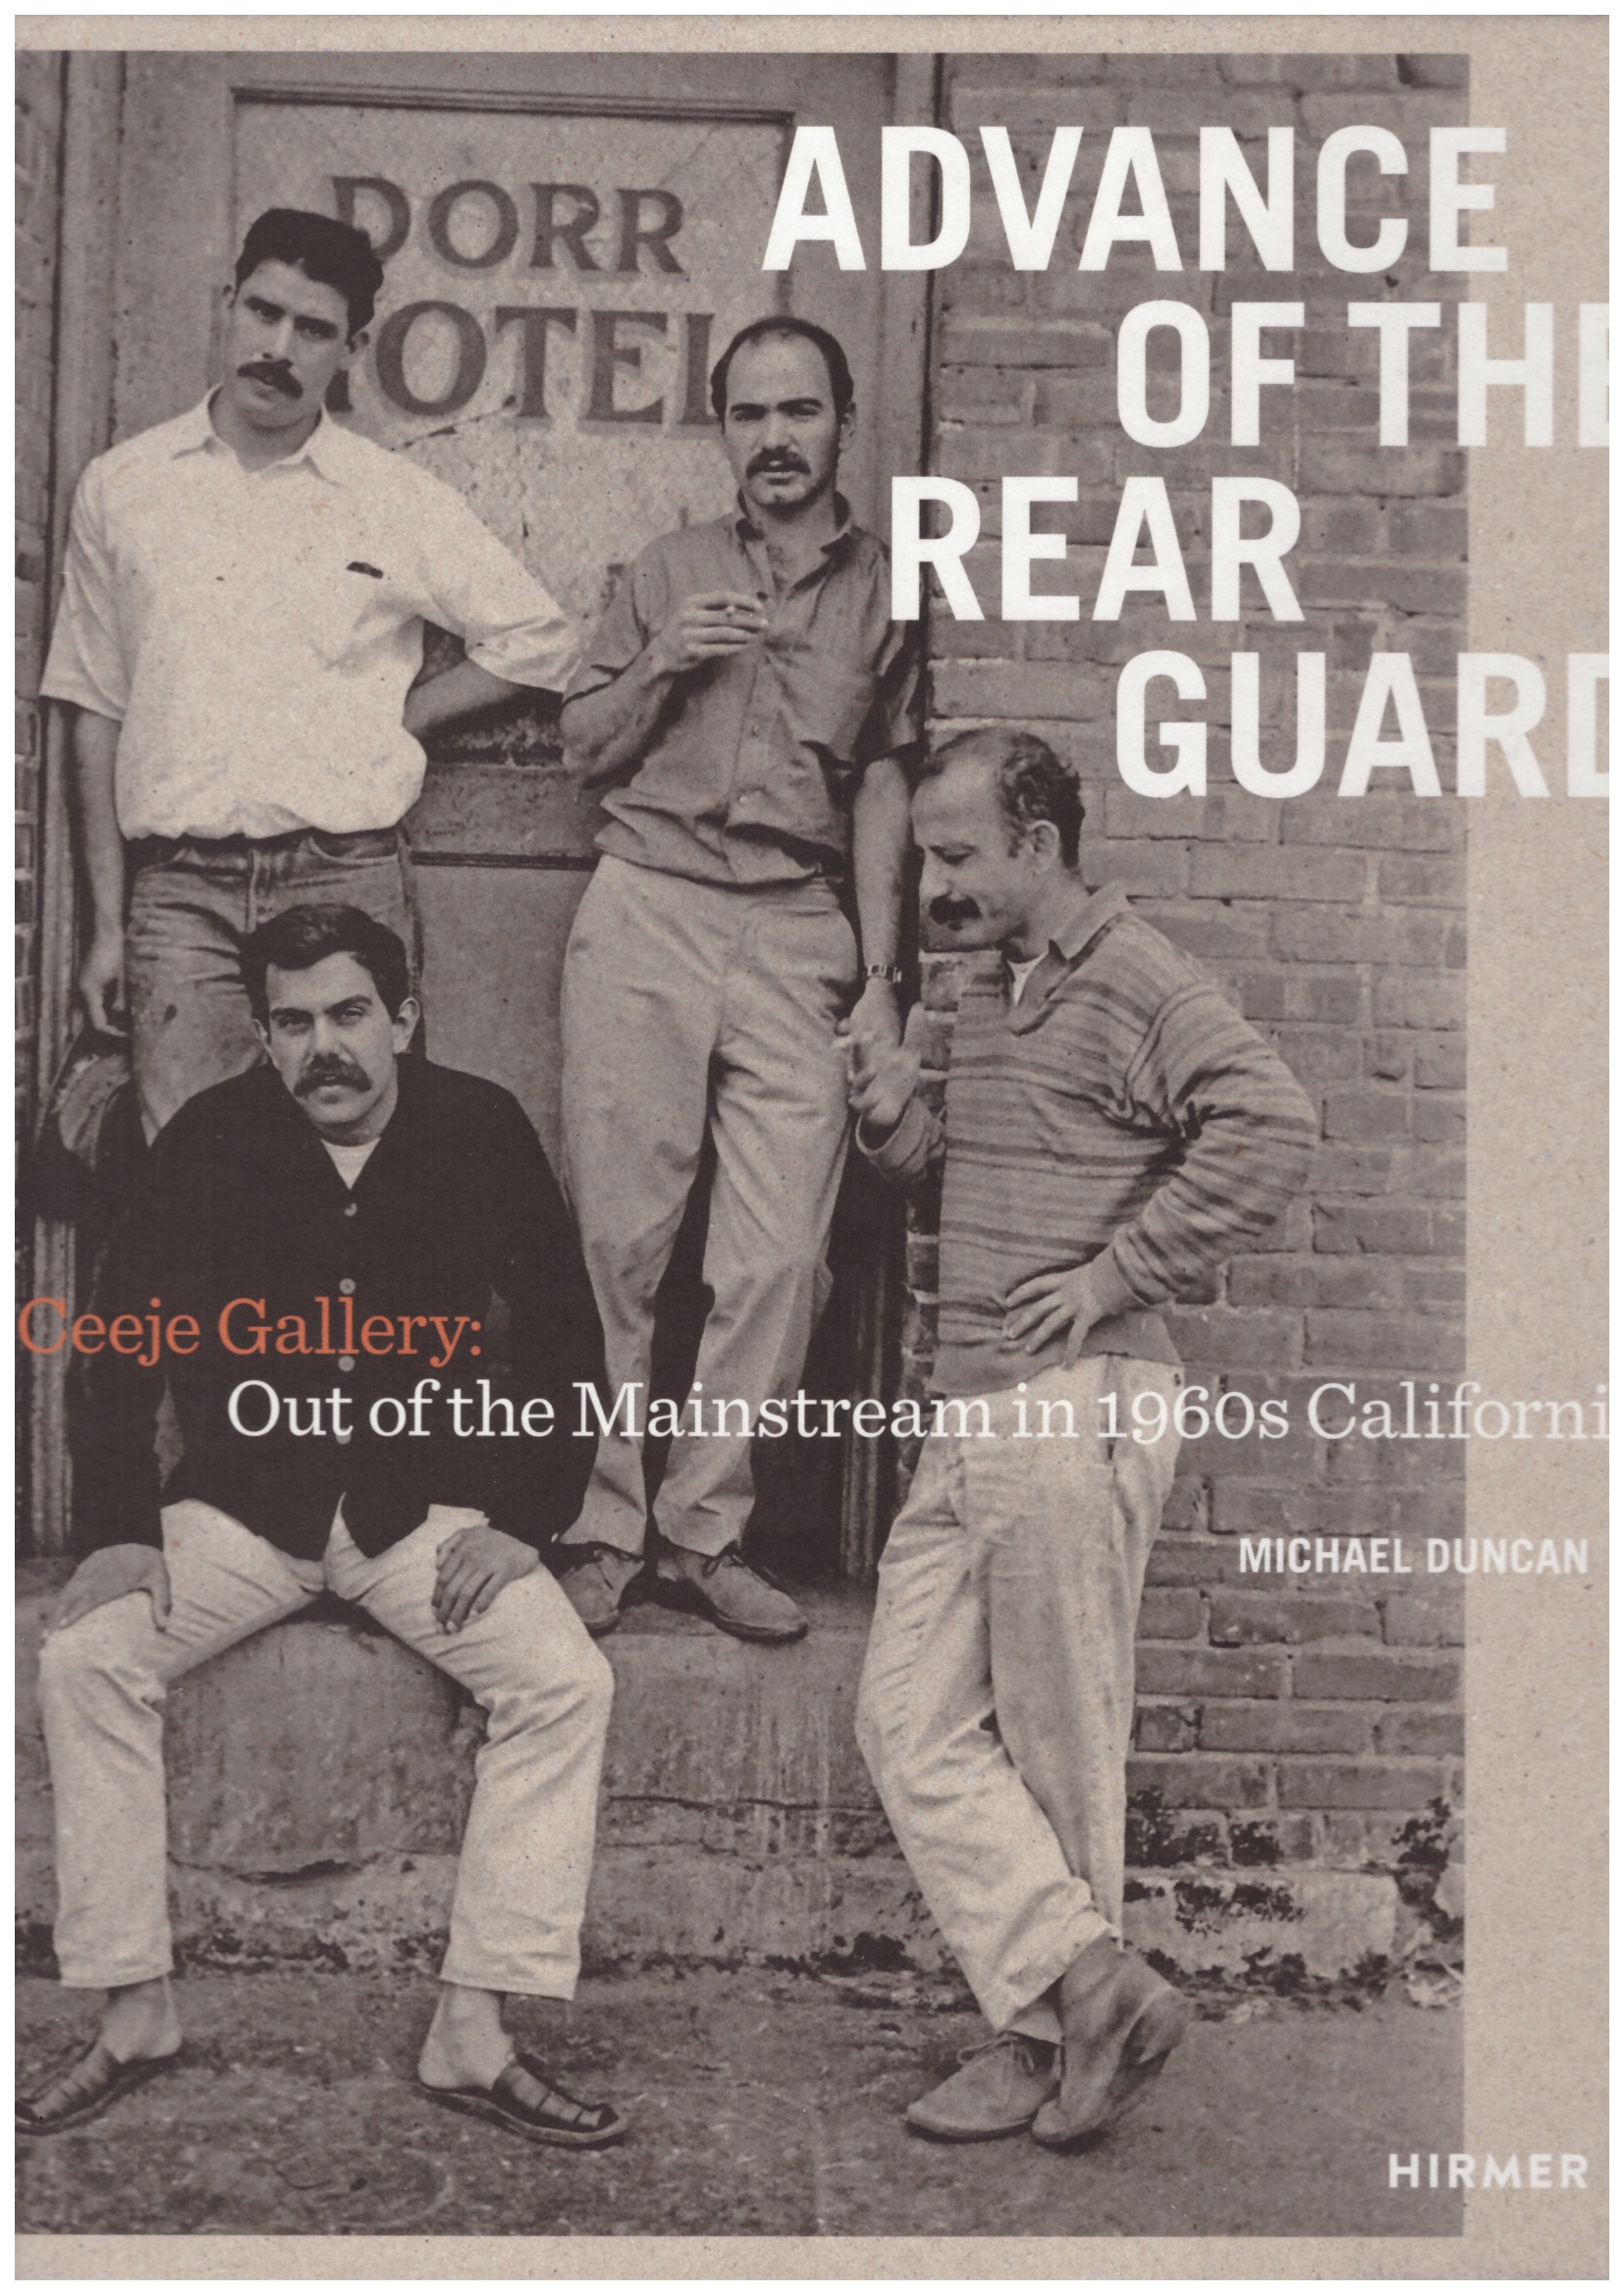 DUNCAN, Michael (ed.) - Advance of the Rear Guard. Ceeje Gallery: Out of the Mainstream in 1960s California